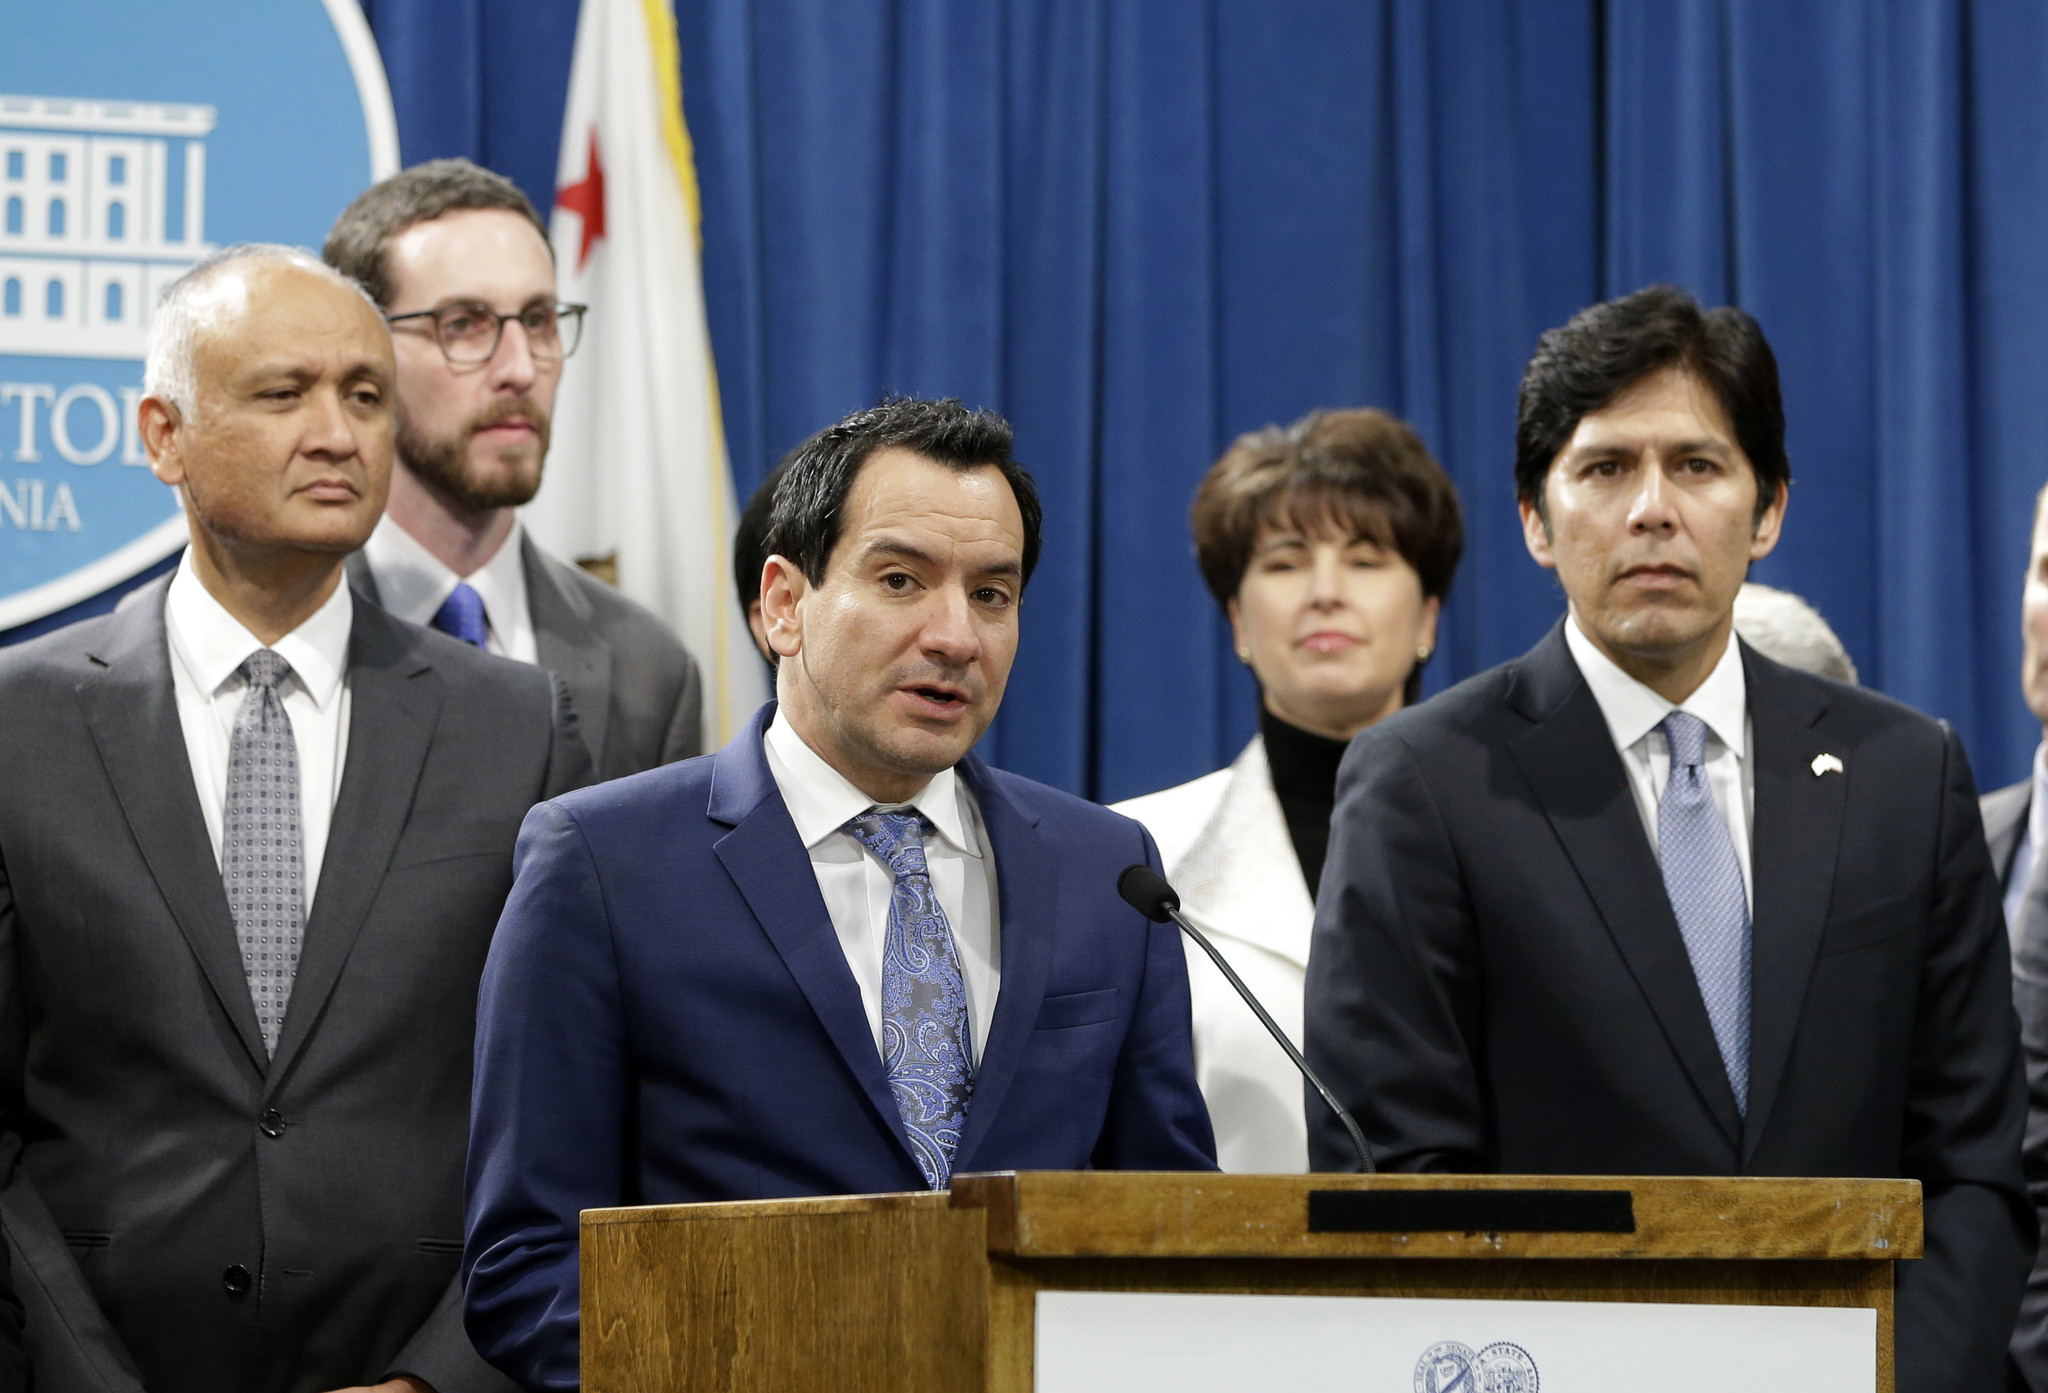 California Assembly Speaker Anthony Rendon, D-Paramount, third from left, flanked by Senate President Pro Tem Kevin de Len, D-Los Angeles, right, and other Democratic lawmakers, discusses a pair of proposed measures to protect immigrants, during a news conference in Sacramento.